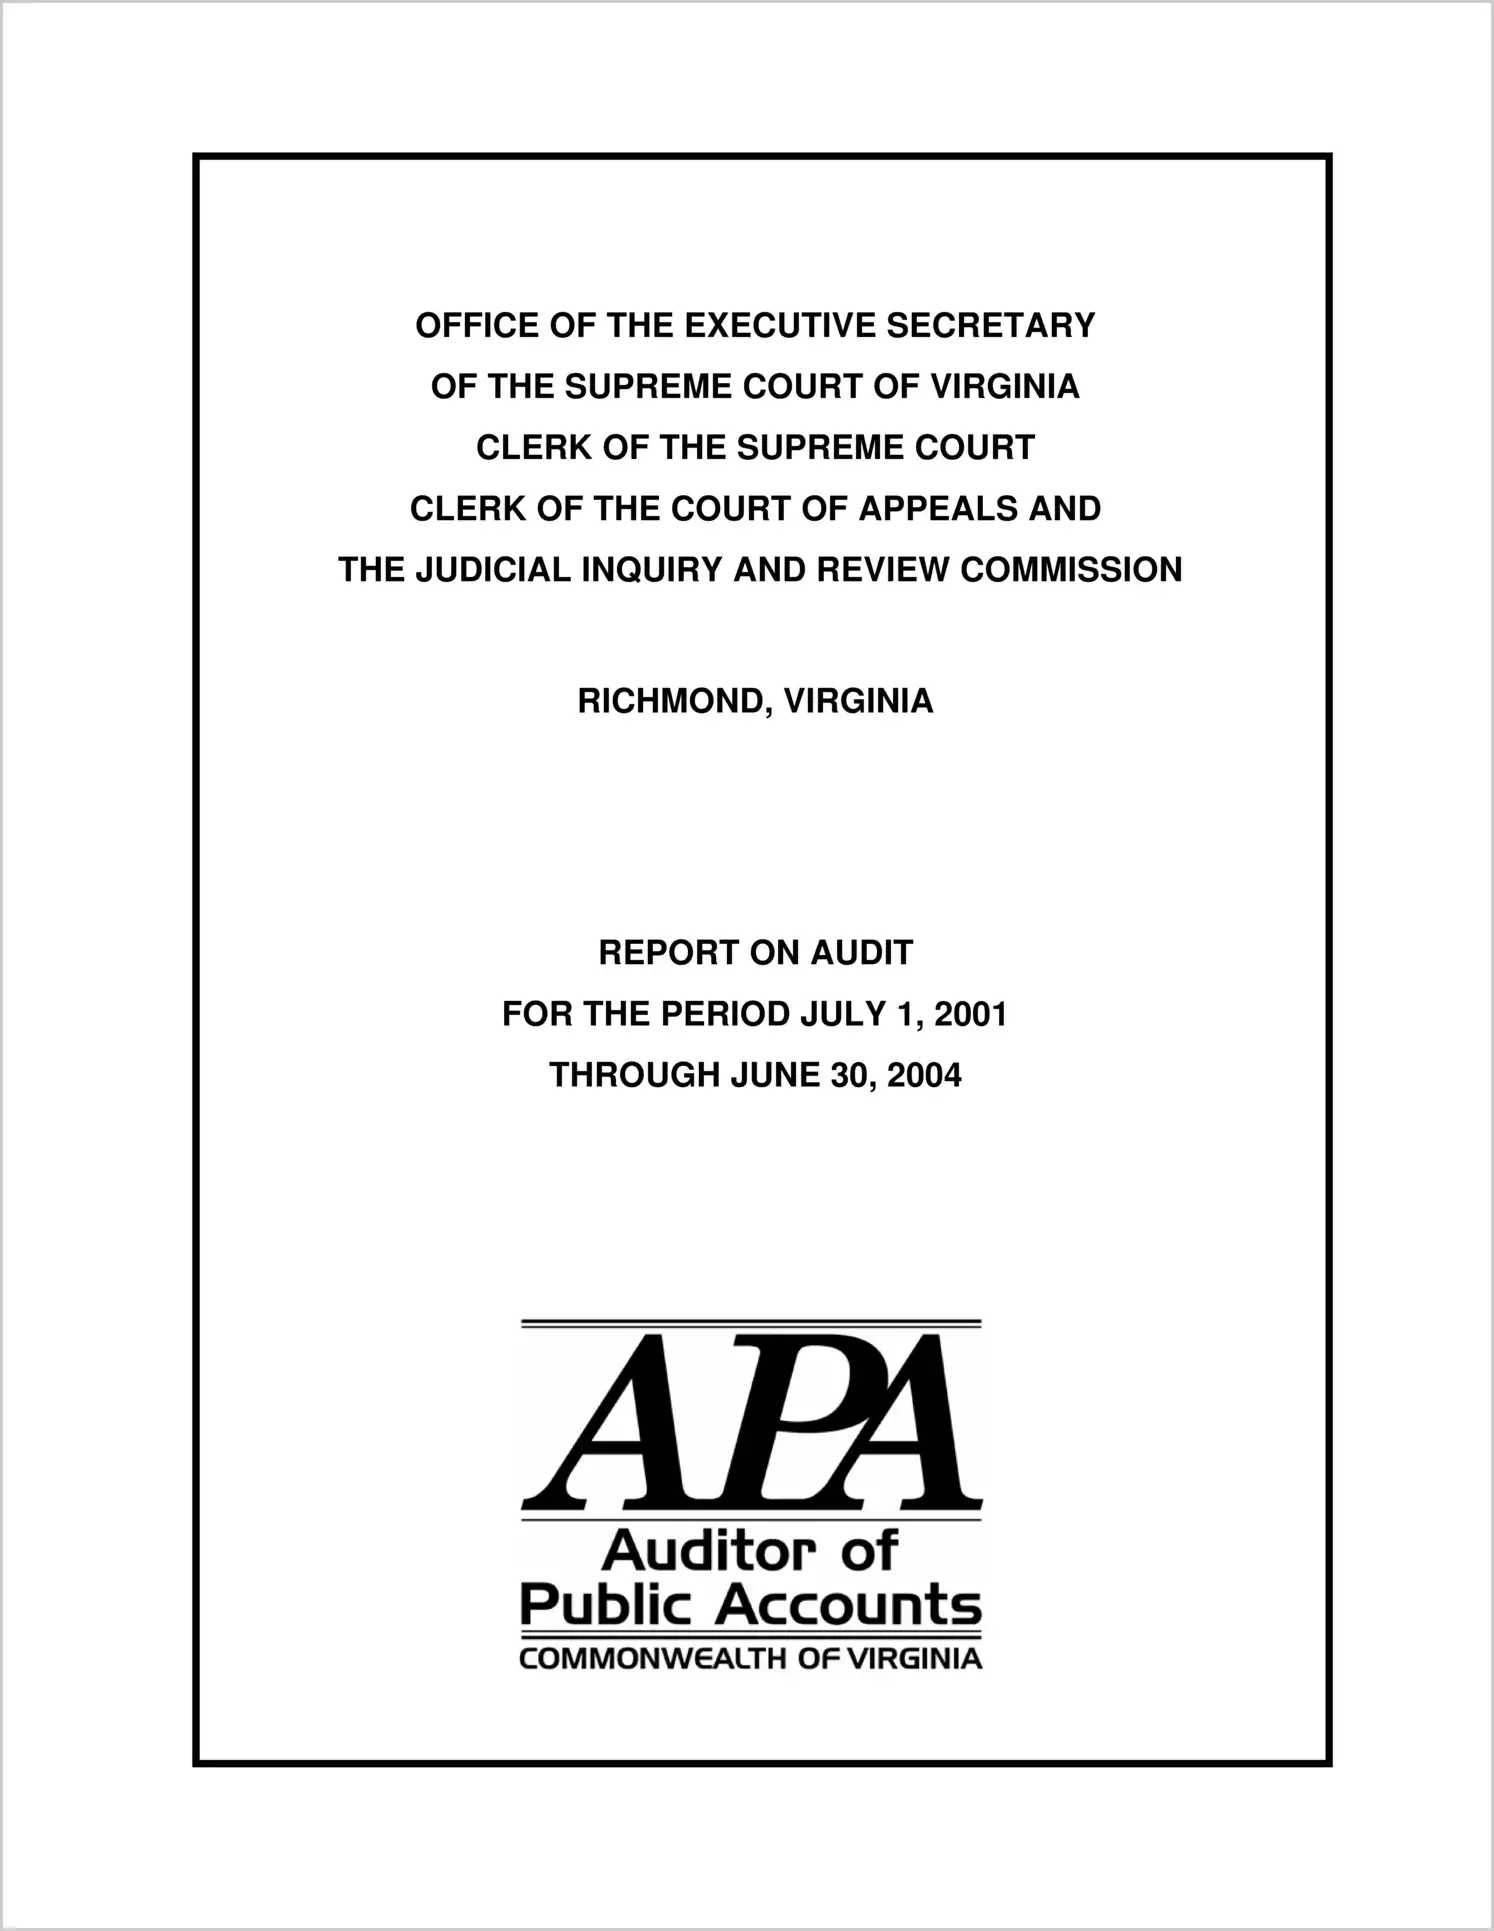 Office of the Executive Secretary of the Supreme Court of Virginia for the period July 1, 2001 through June 30, 2004